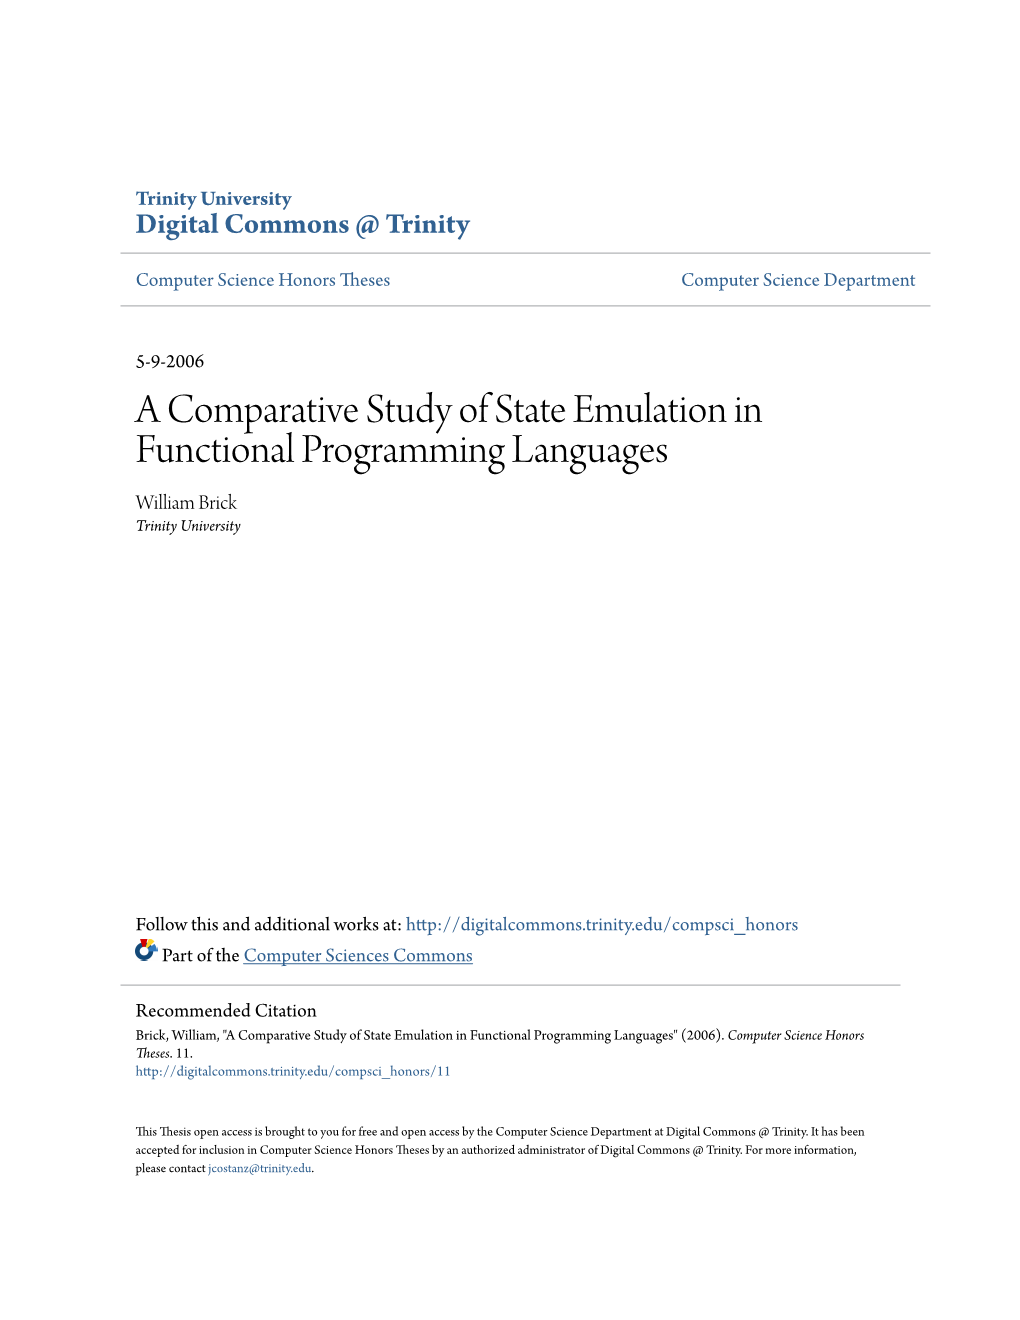 A Comparative Study of State Emulation in Functional Programming Languages William Brick Trinity University